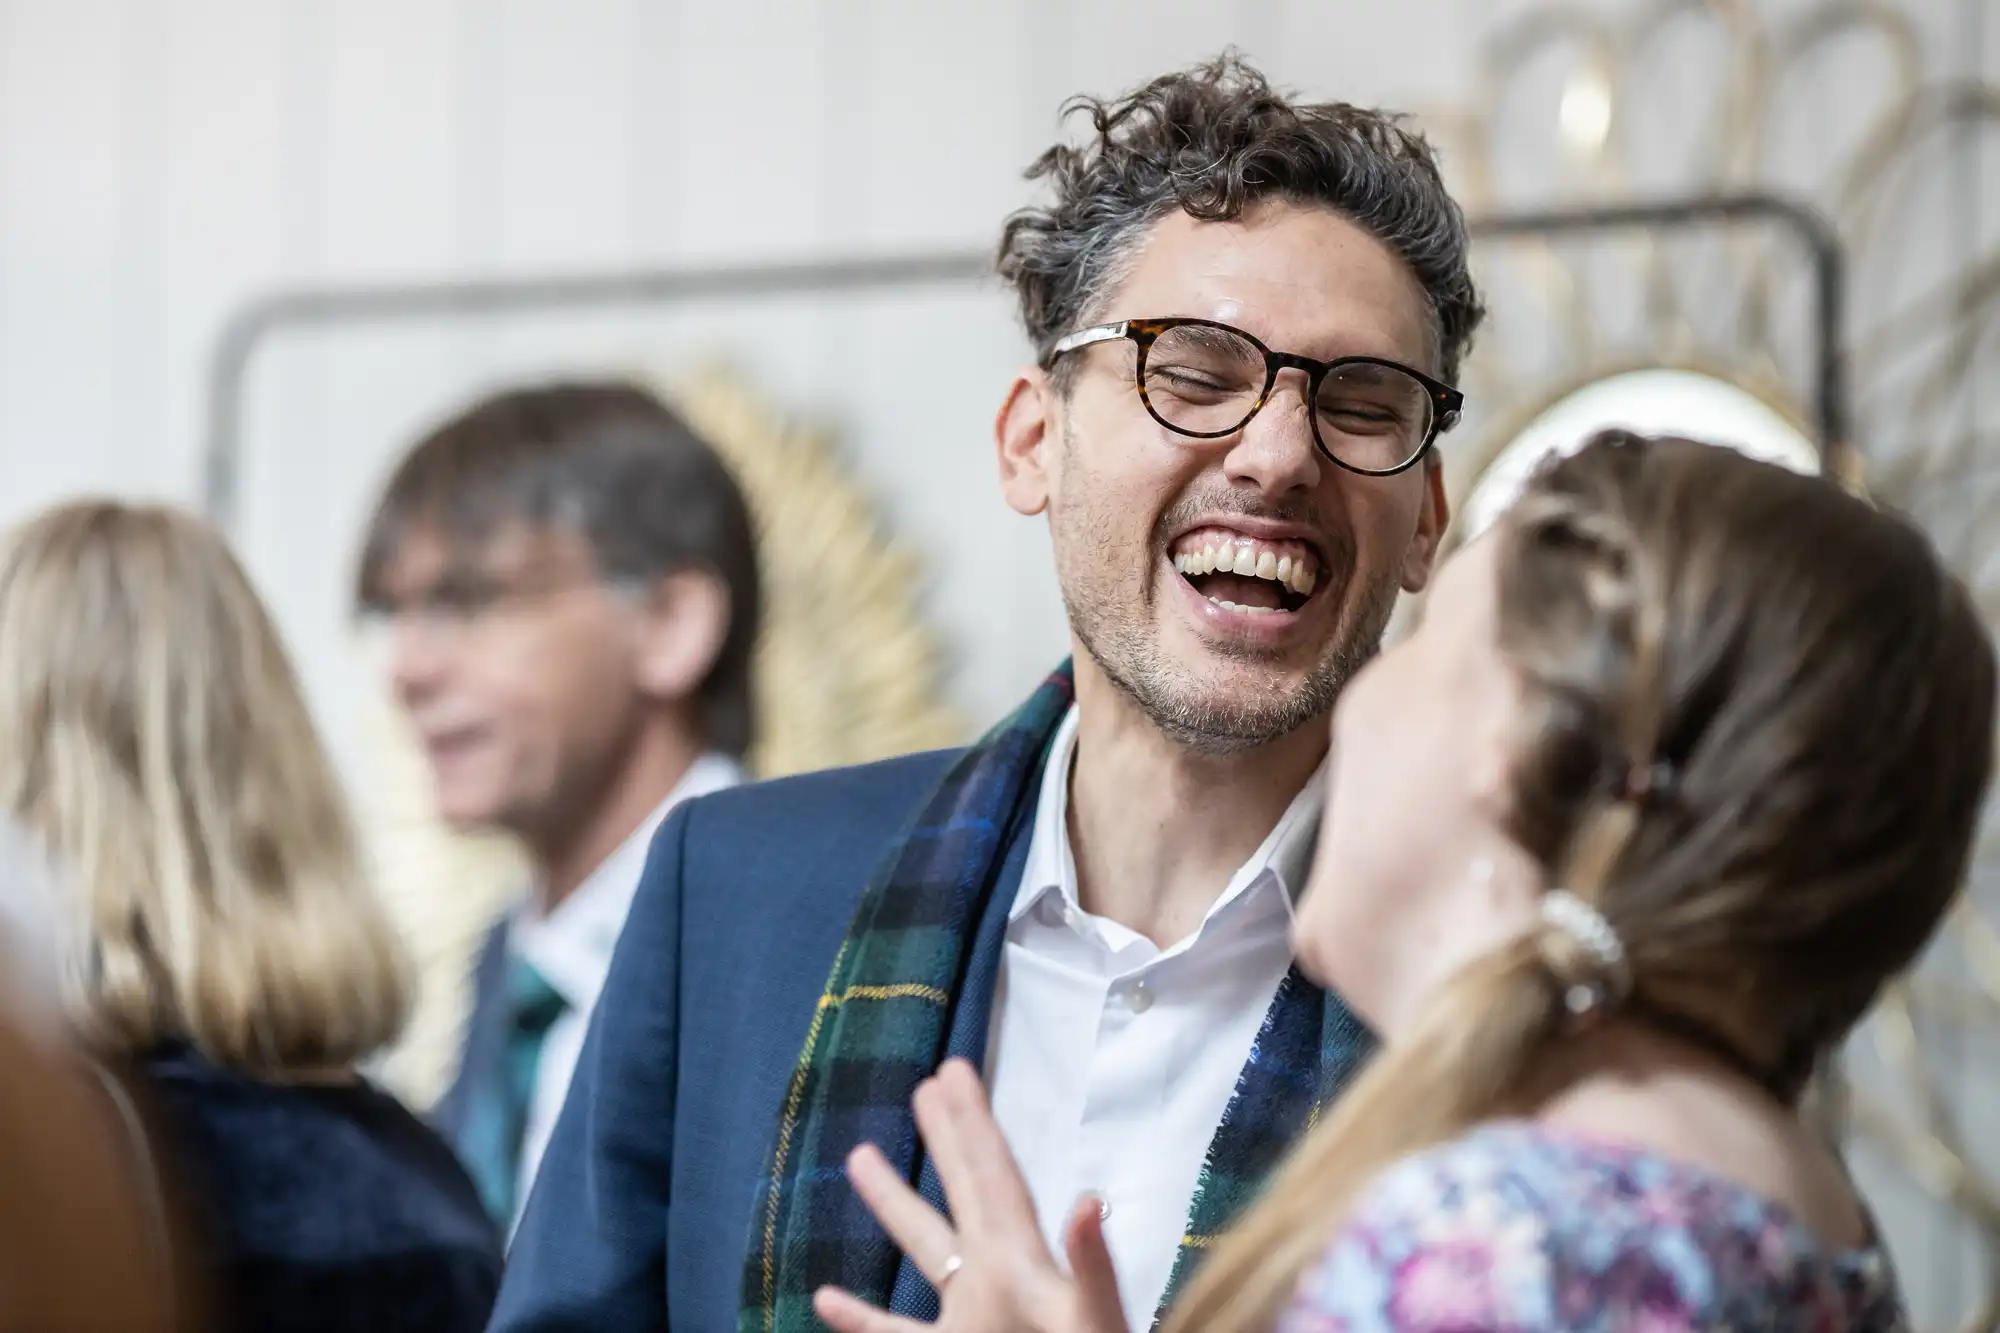 A man with glasses and curly hair laughs with a woman at a social gathering. Other people are visible in the background.